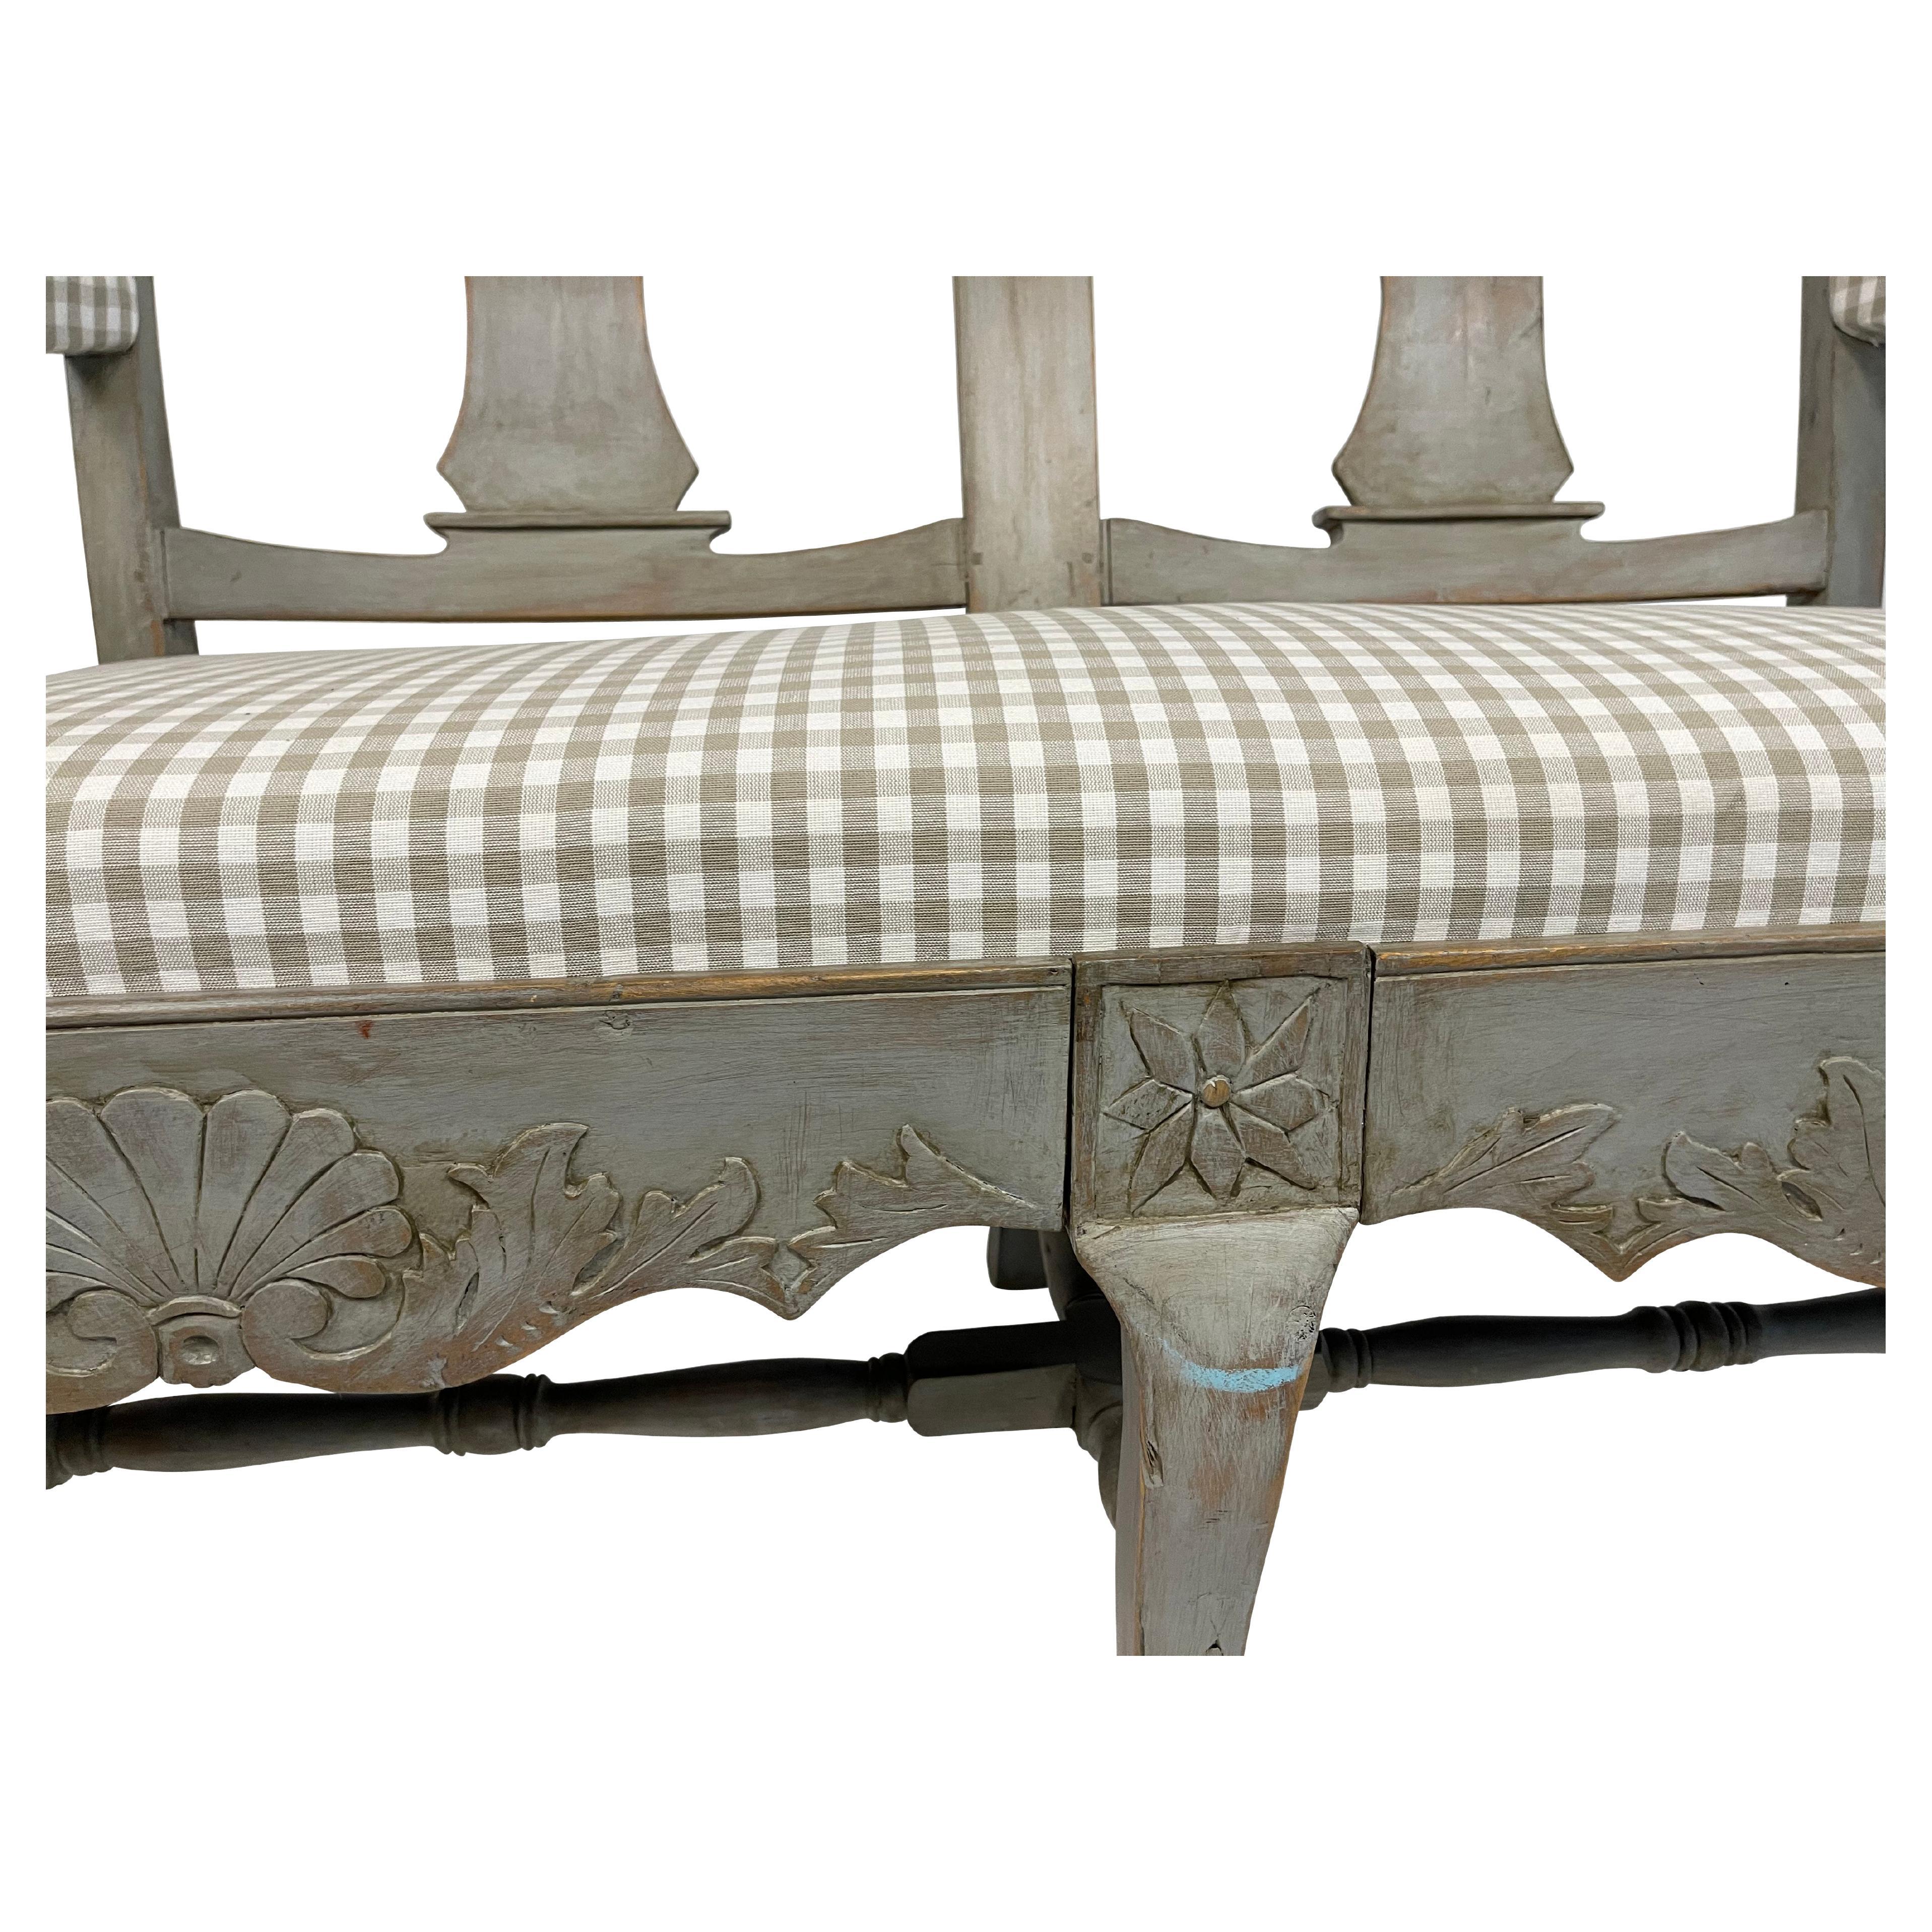 Grey painted Swedish settee with shell and foliate carving with turned stretcher bottom and gently curved legs. Off-white muslin seat cover. Measures: 44